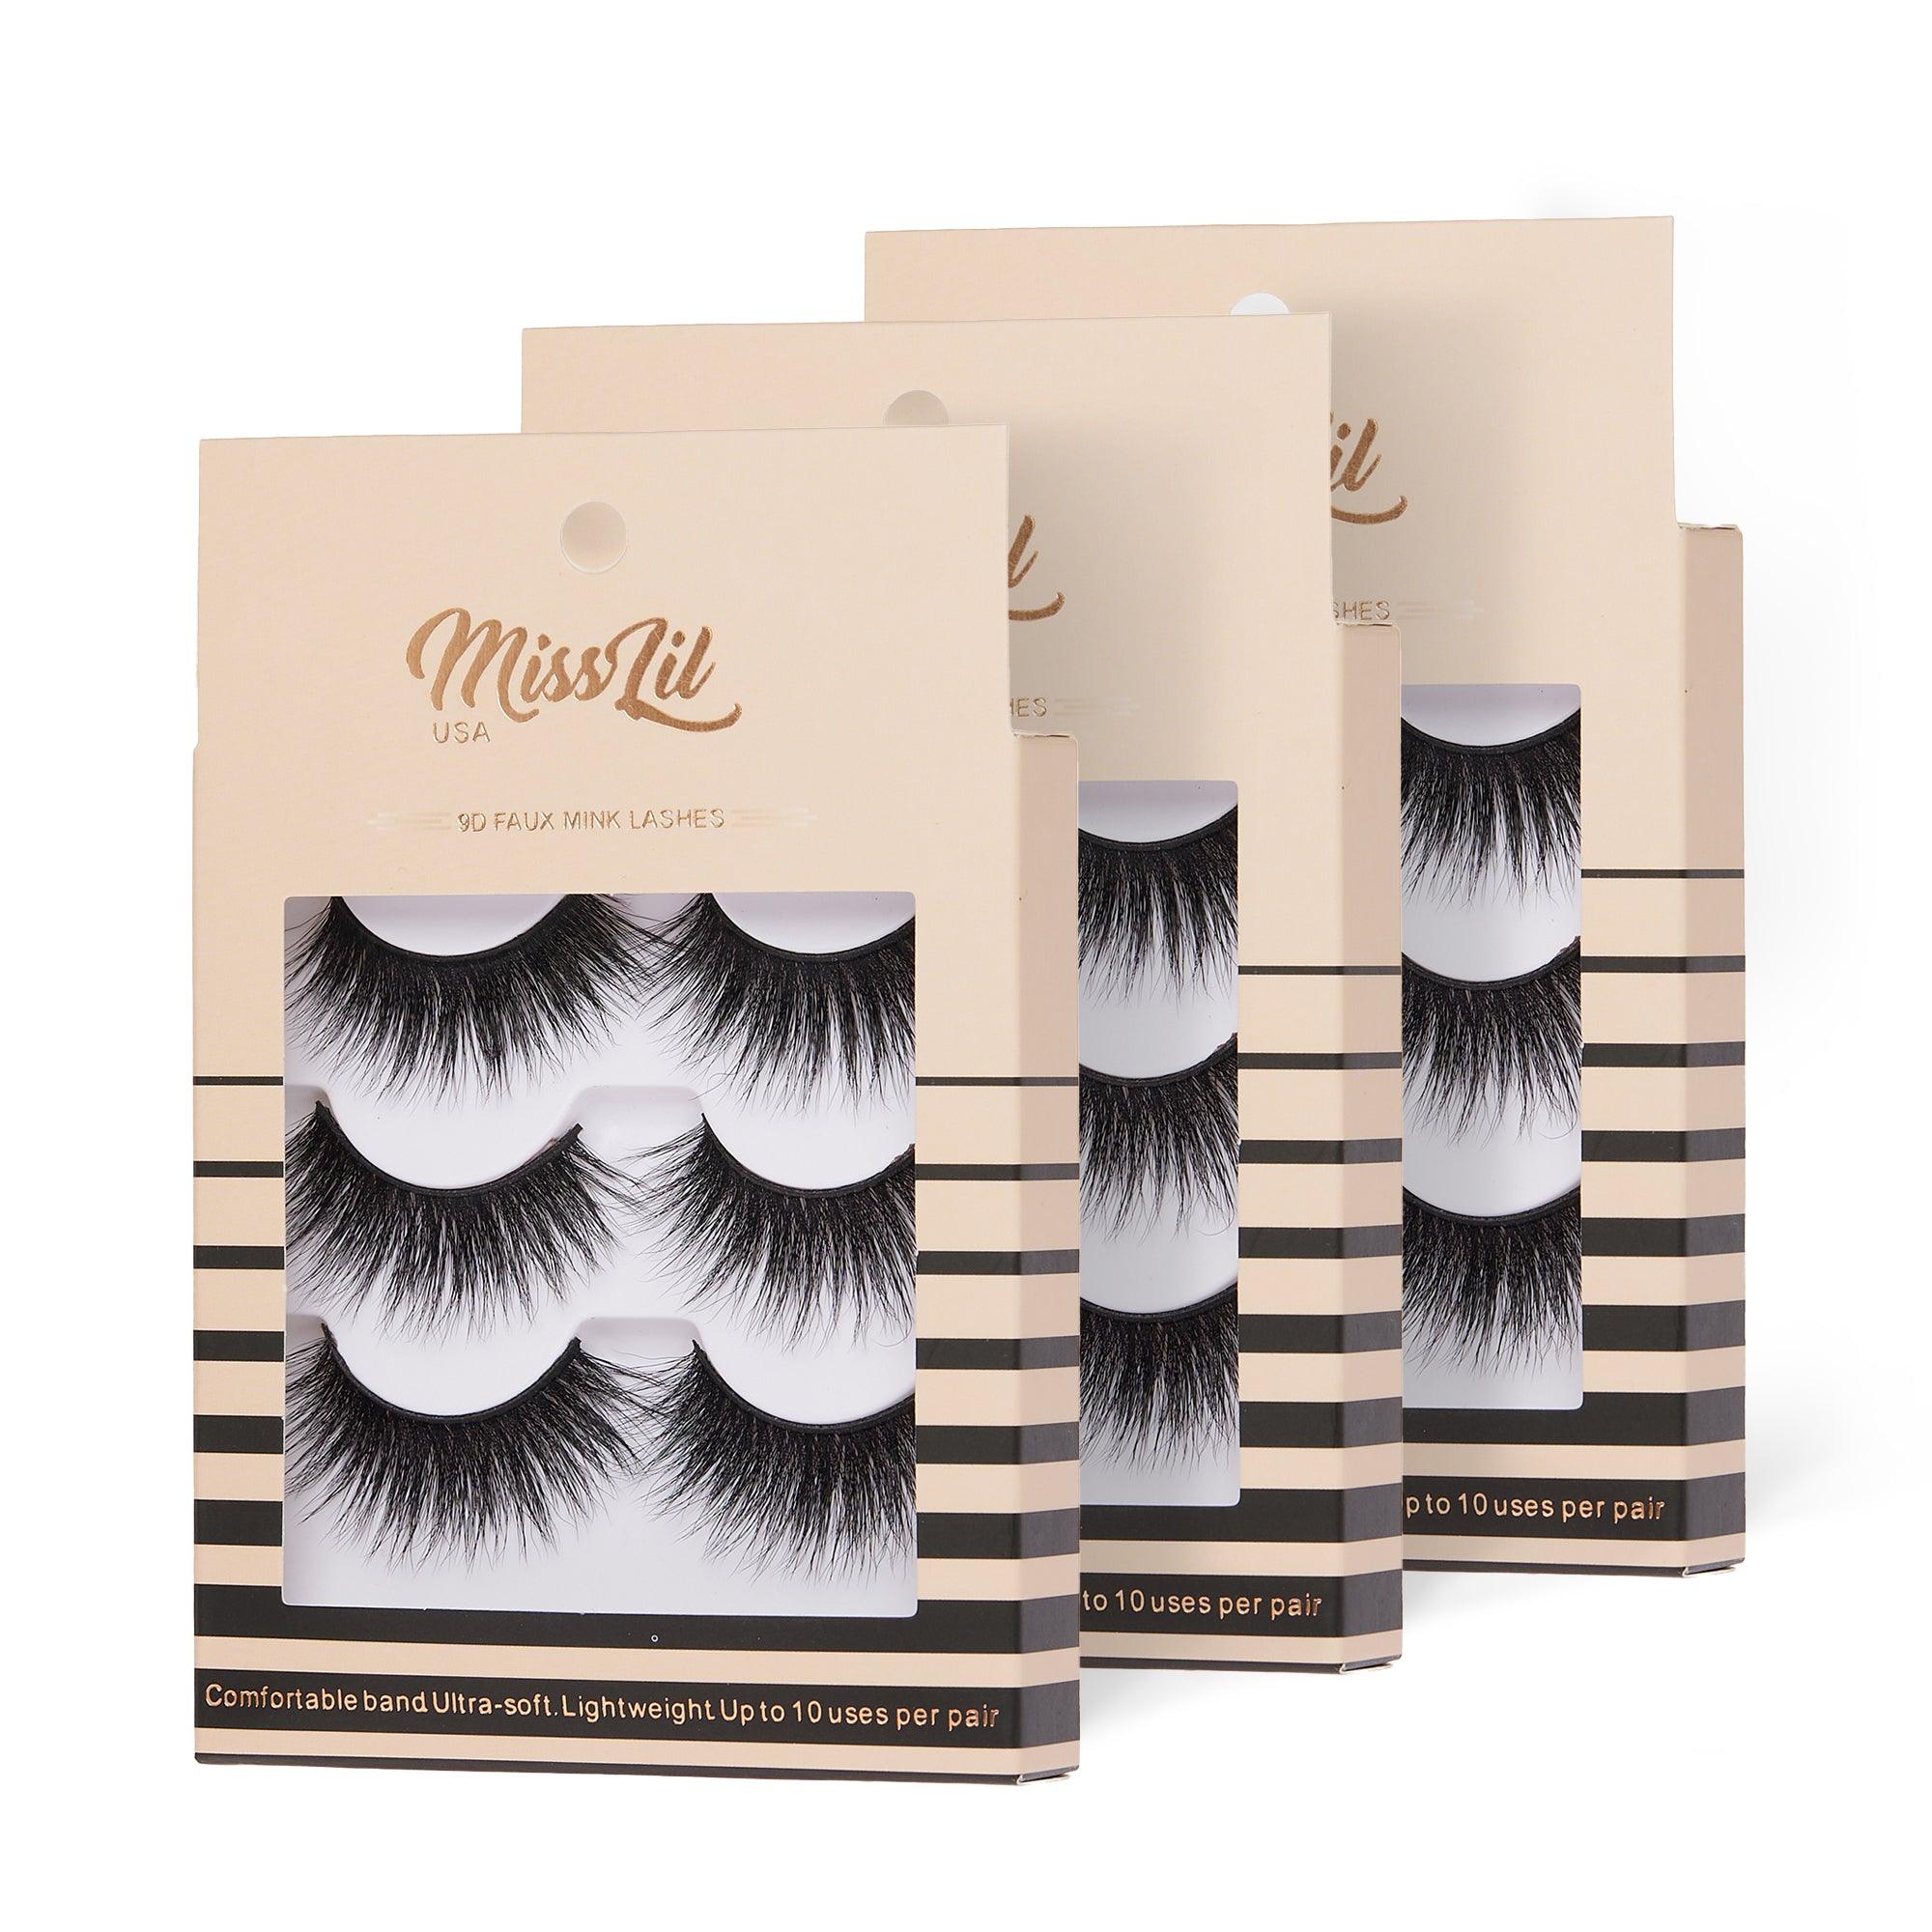 3-Pair Faux 9D Mink Eyelashes - Luxury Collection #27 - Pack of 3 - Miss Lil USA